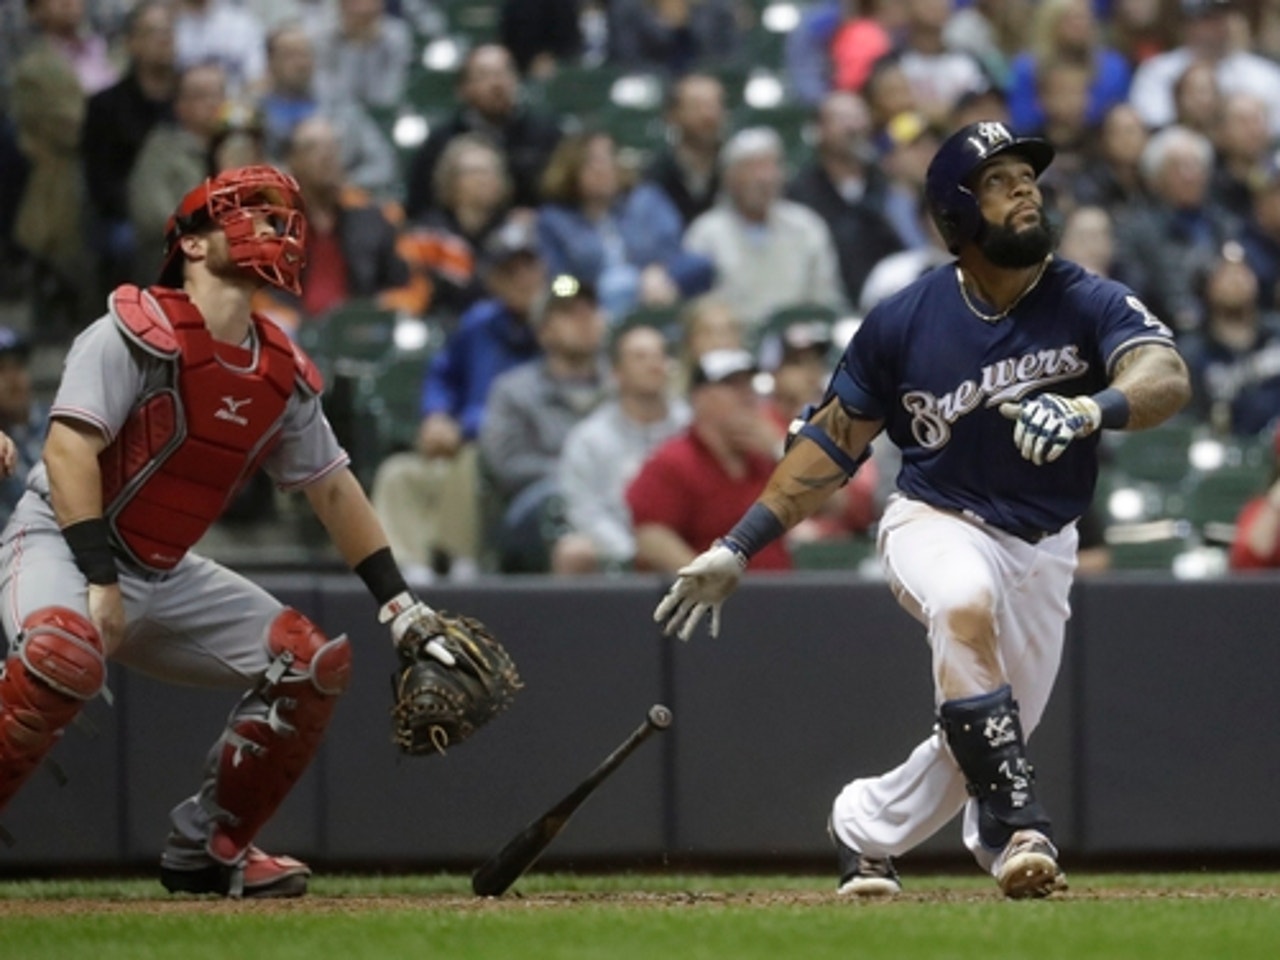 Brewers' Eric Thames makes All-Star case